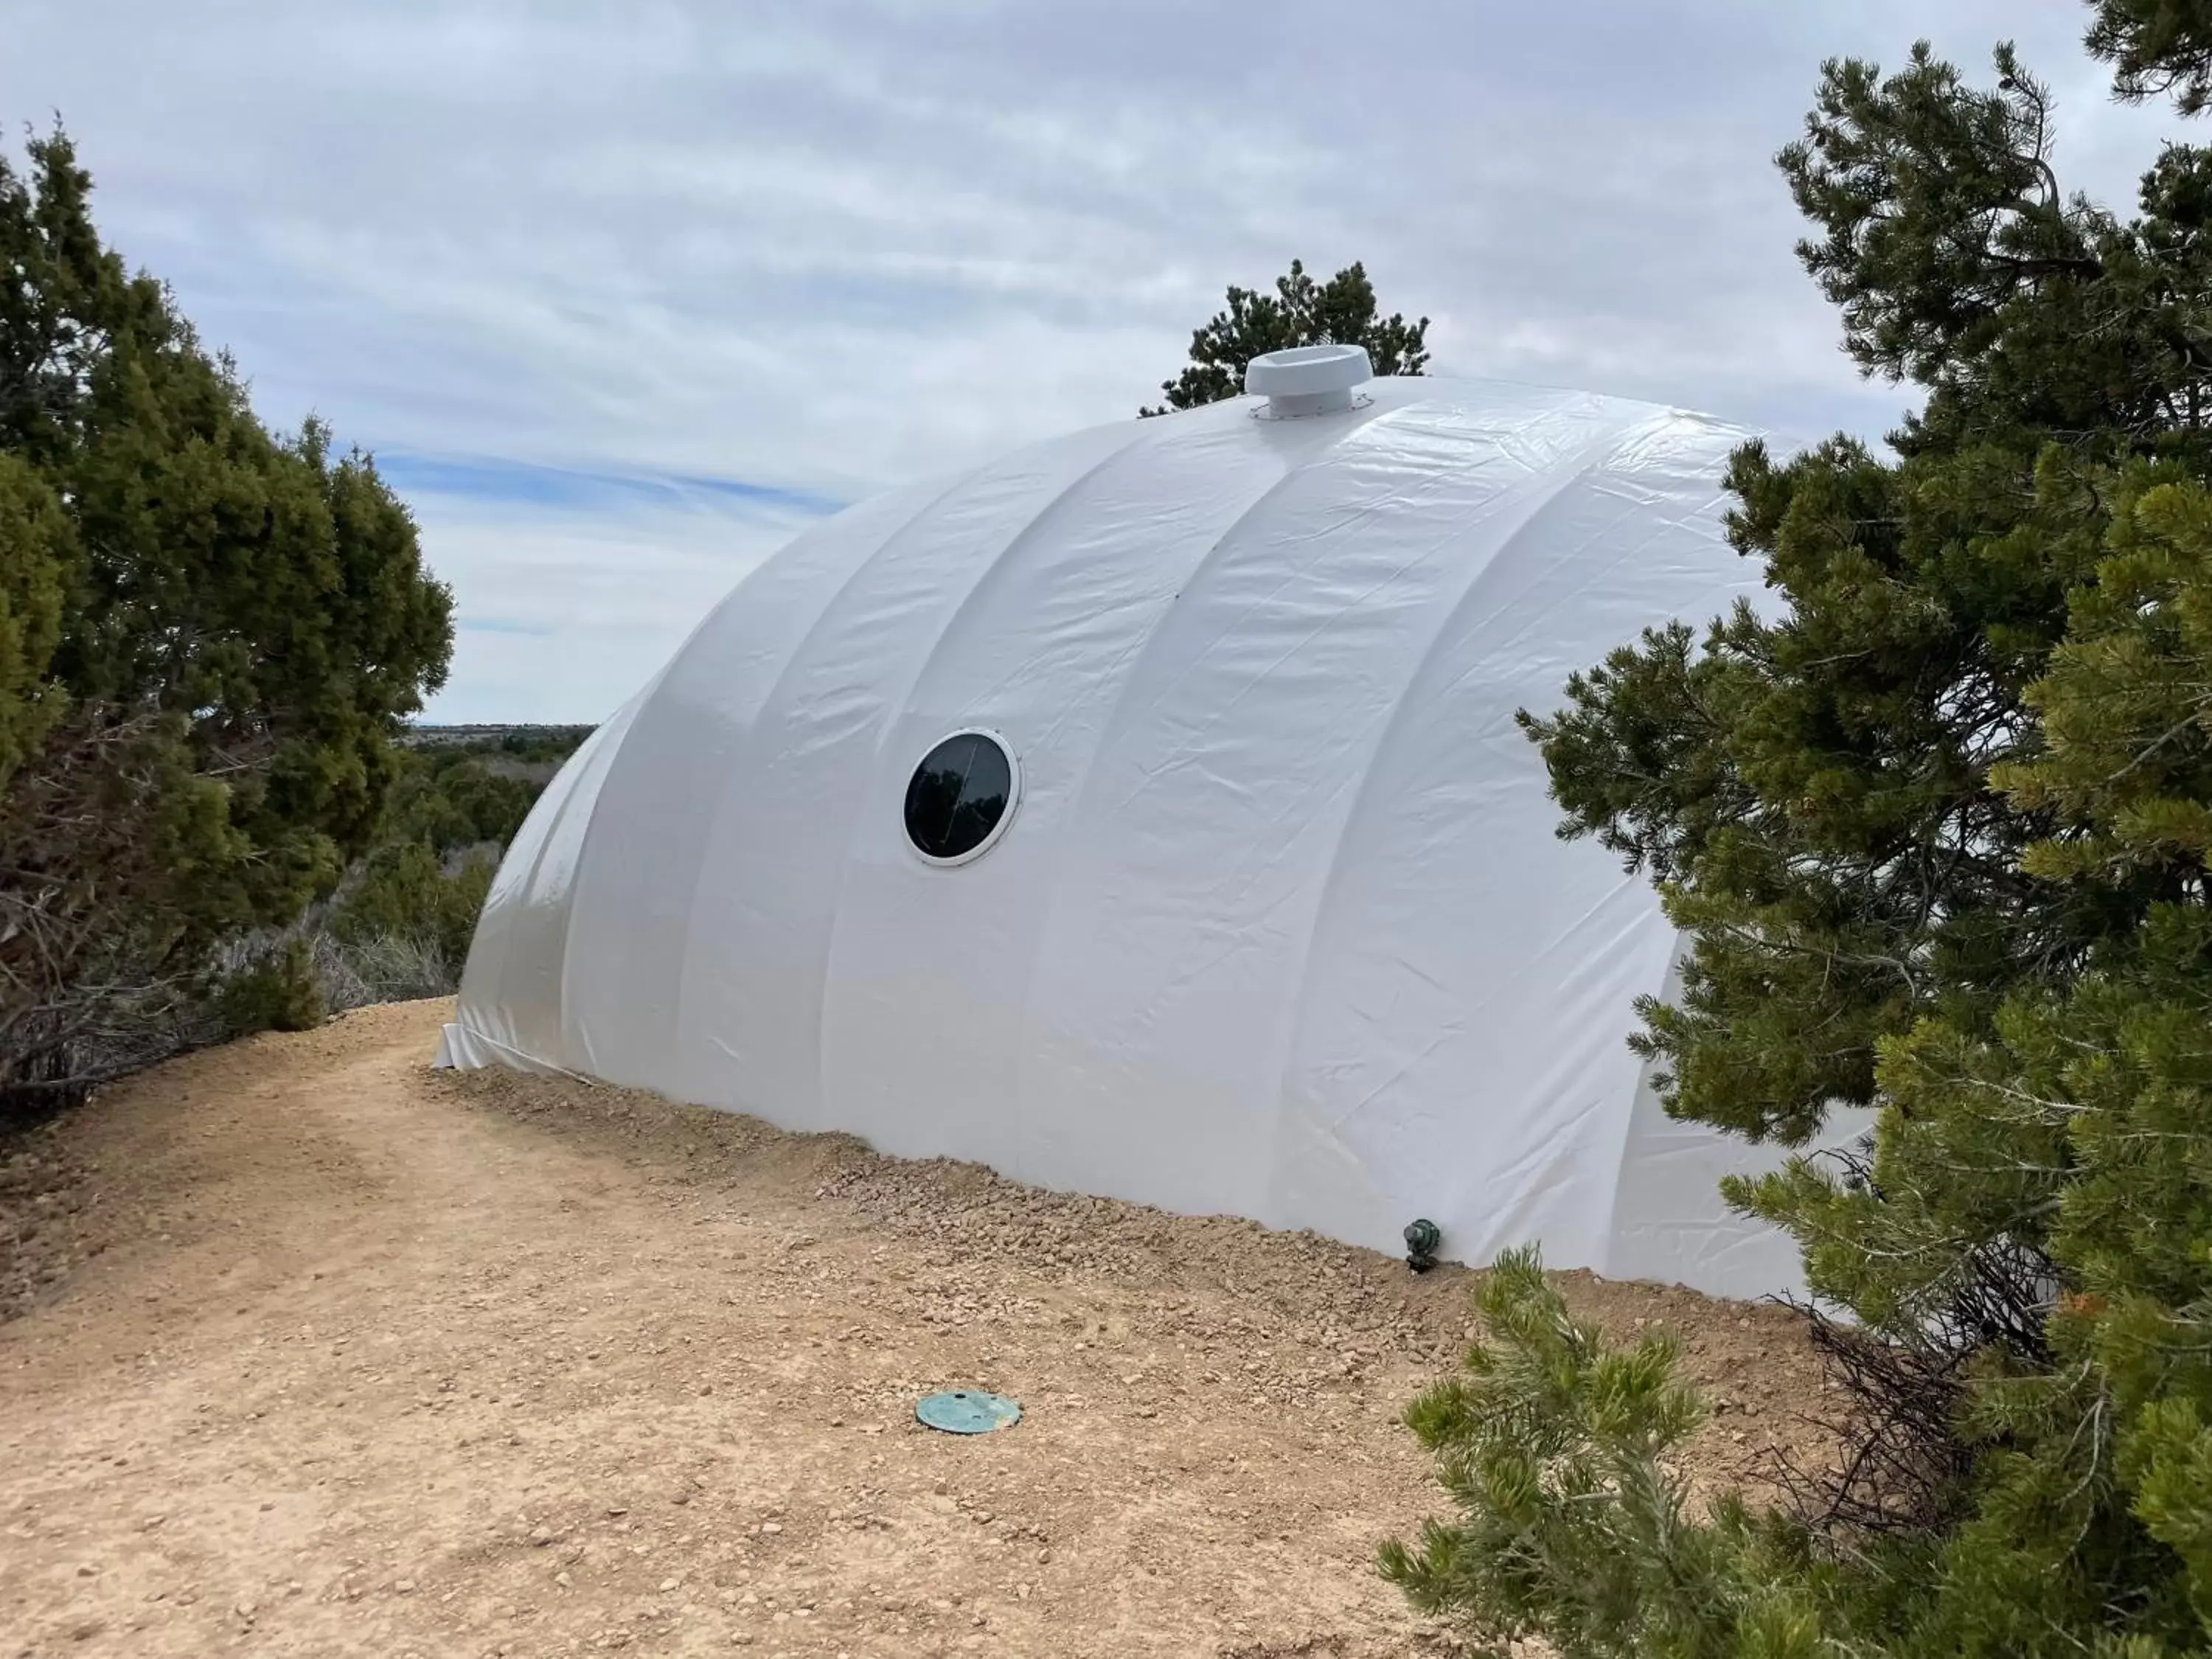 Property building in Canyon Rim Domes - A Luxury Glamping Experience!!